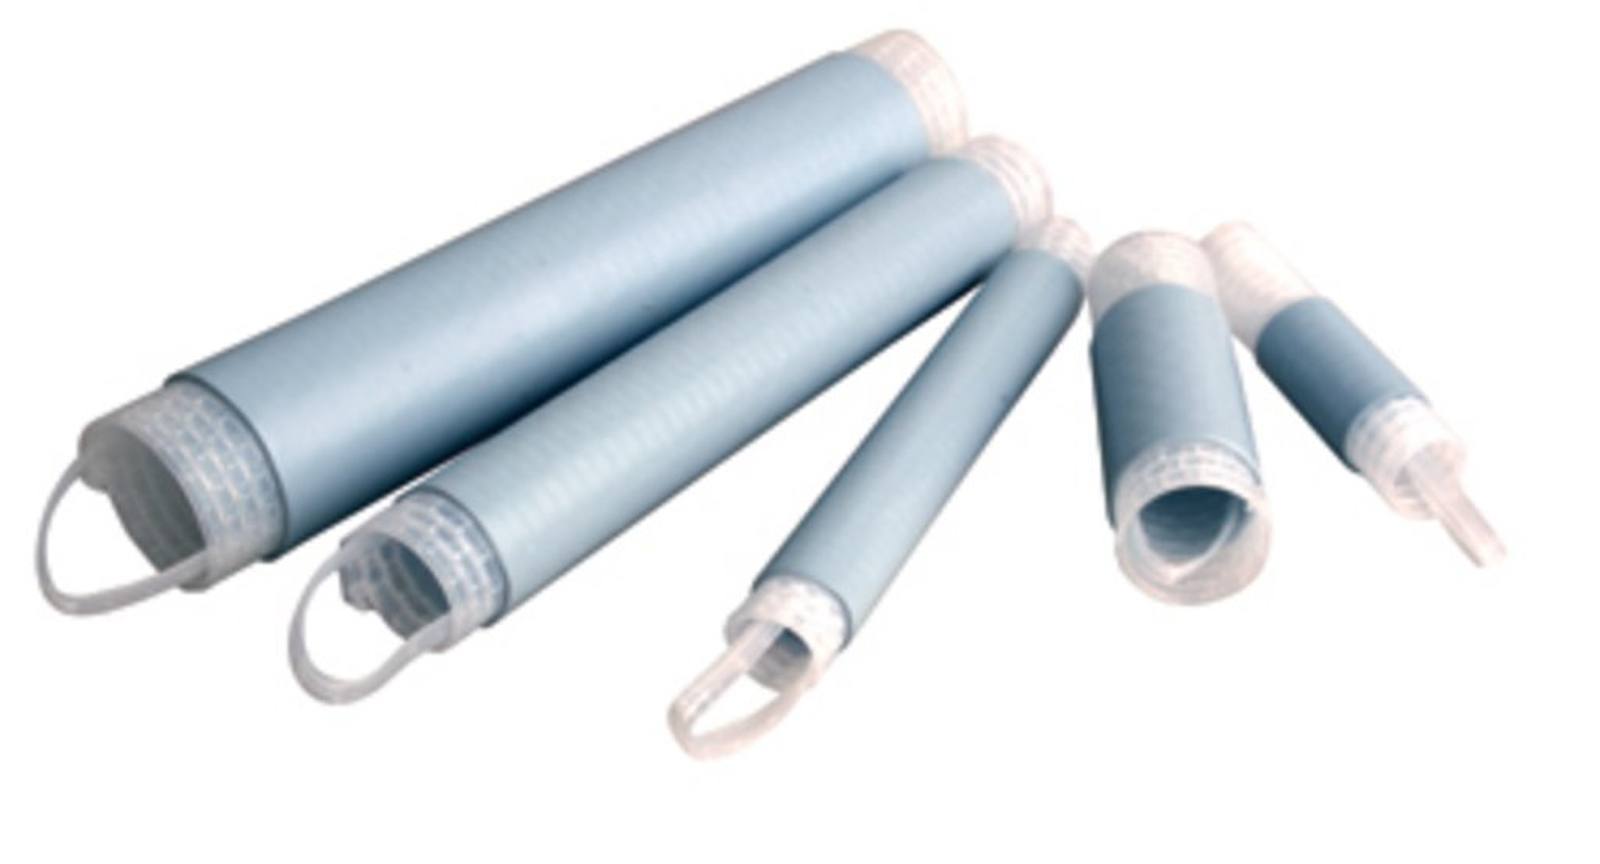 3M 8443.65 Cold-shrink tubing, silicone, light grey, 14.3/8.9 mm, 159 mm